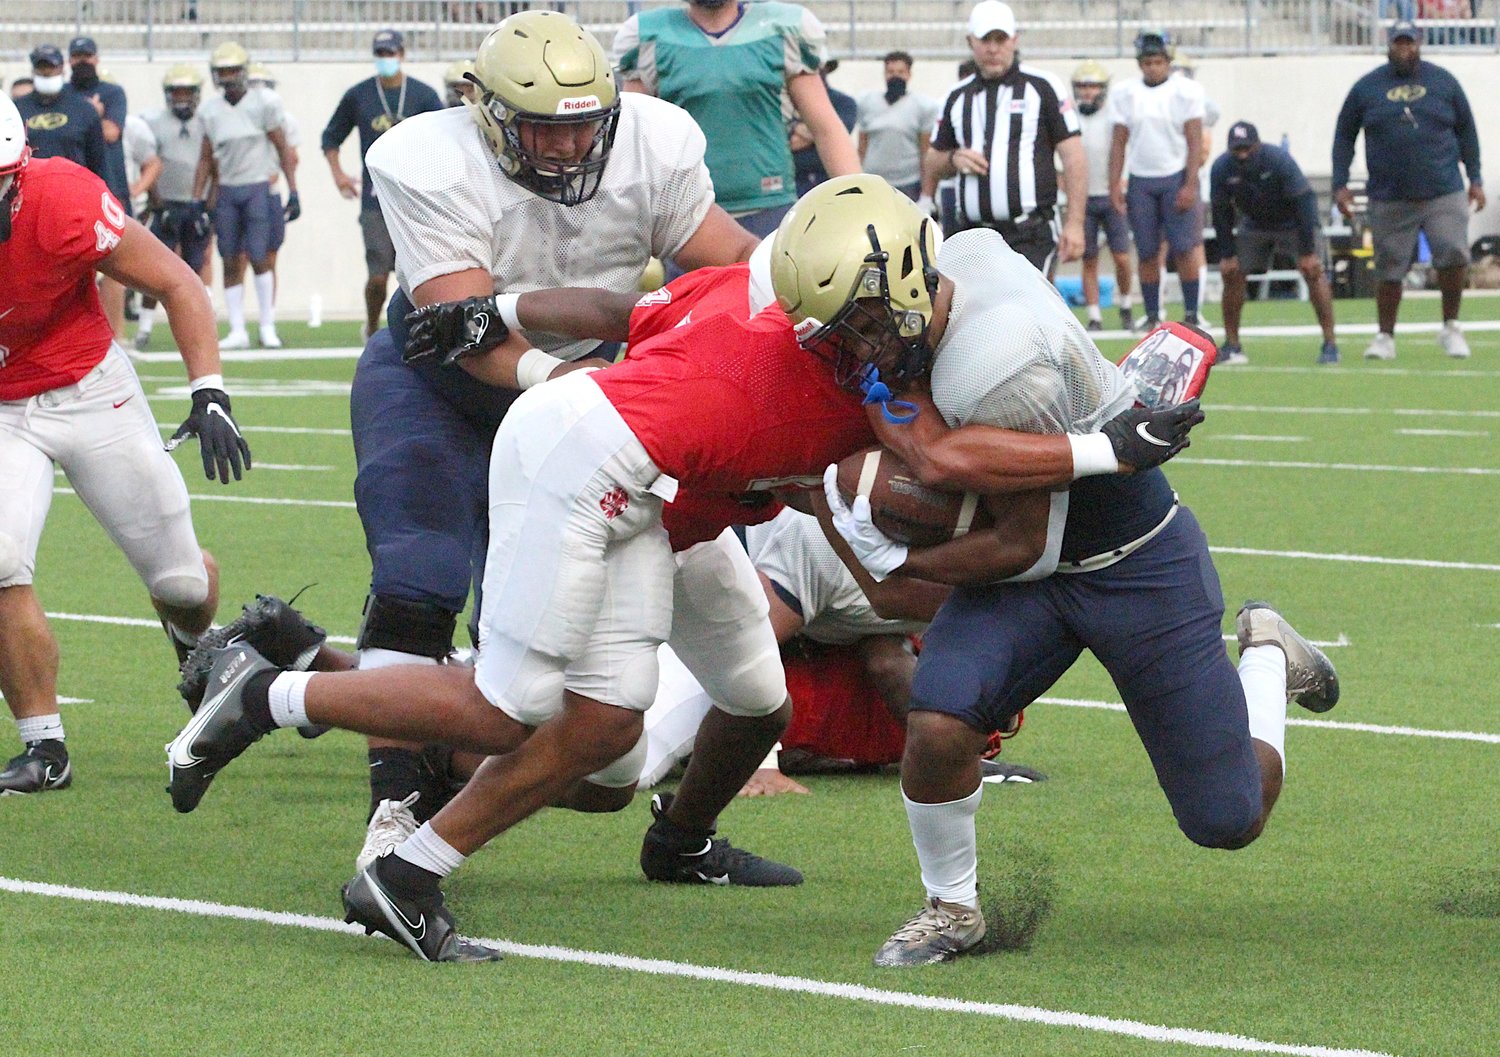 The Katy Tiger defense brought the boom in its scrimmage against Klein Collins last night at Legacy Stadium. In the live periods of play, Katy held the visiting Tigers scoreless through two quarters.